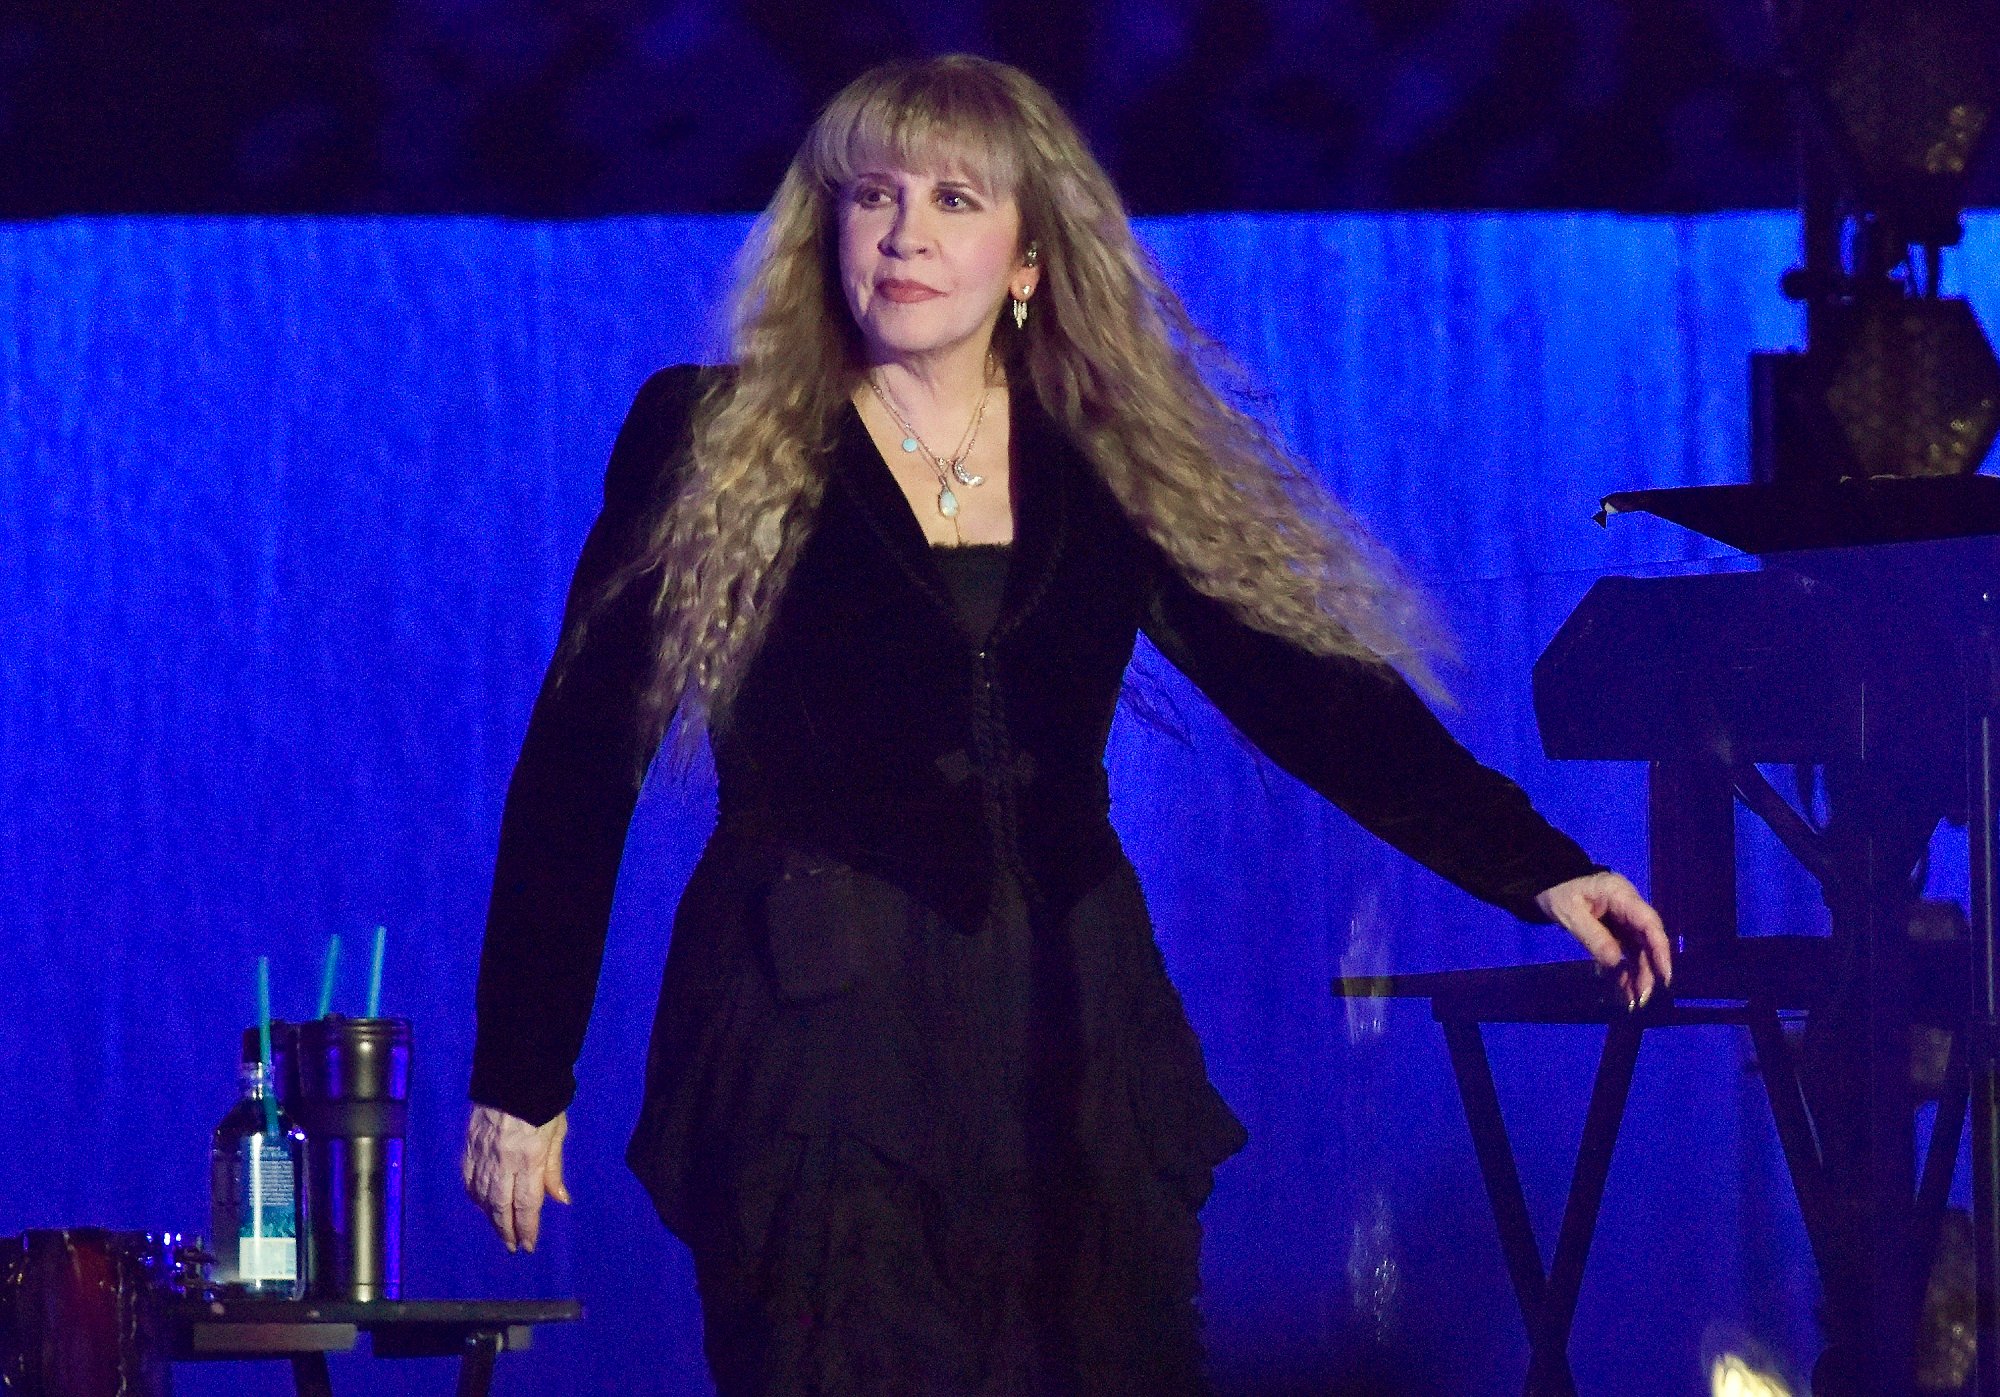 Stevie Nicks walks on stage wearing a black long-sleeved outfit